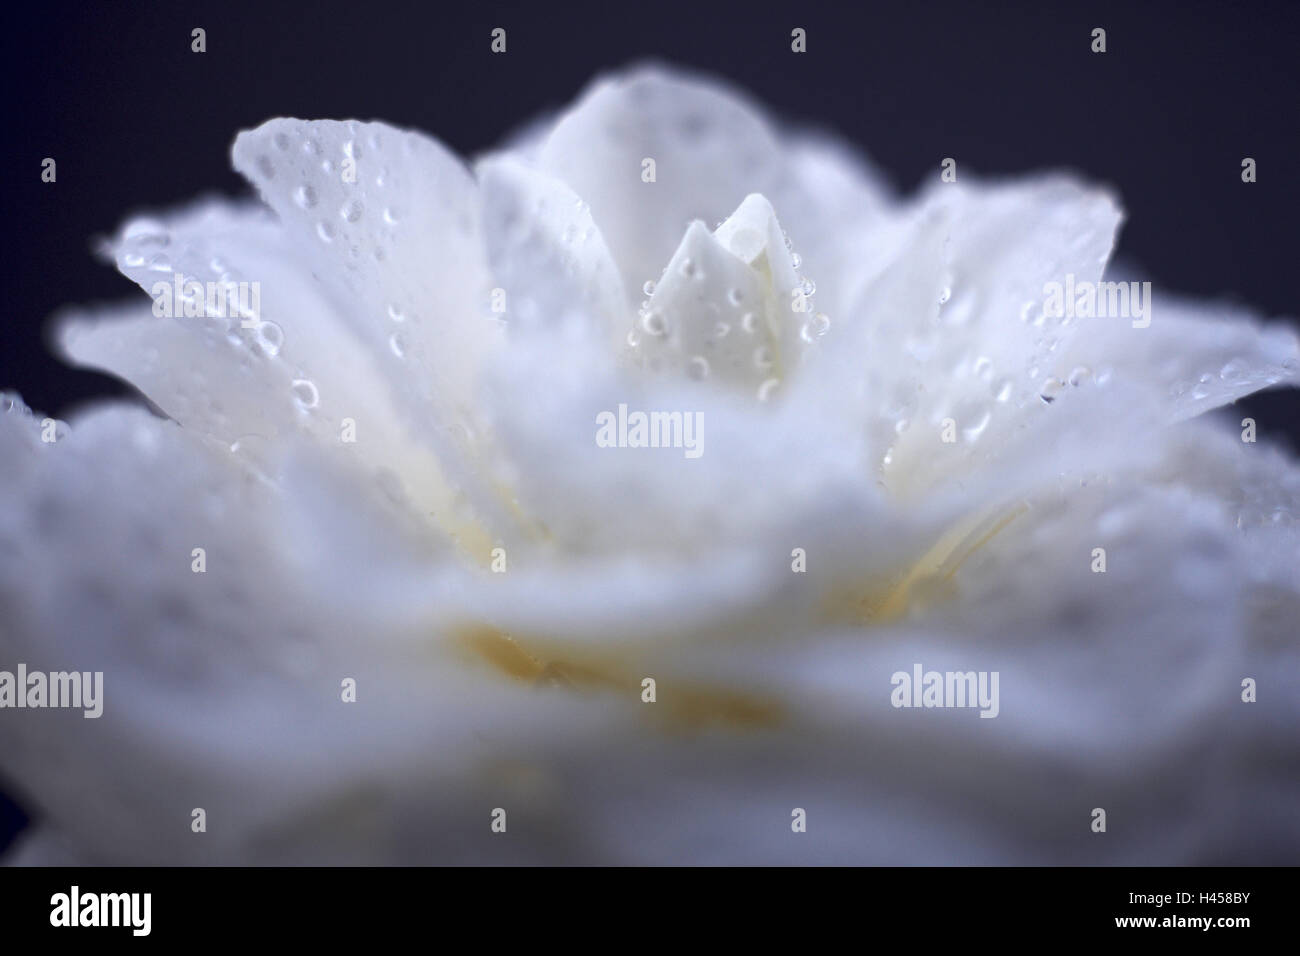 Japanese camellia, Camellia japonica, blossom, drop water, medium close-up, camellia, flower blossom, flower, white, openly, ornamental plant, odour, icon, wellness, wet, softly, cleanness, freshness, life, dewdrop, raindrop, Stock Photo